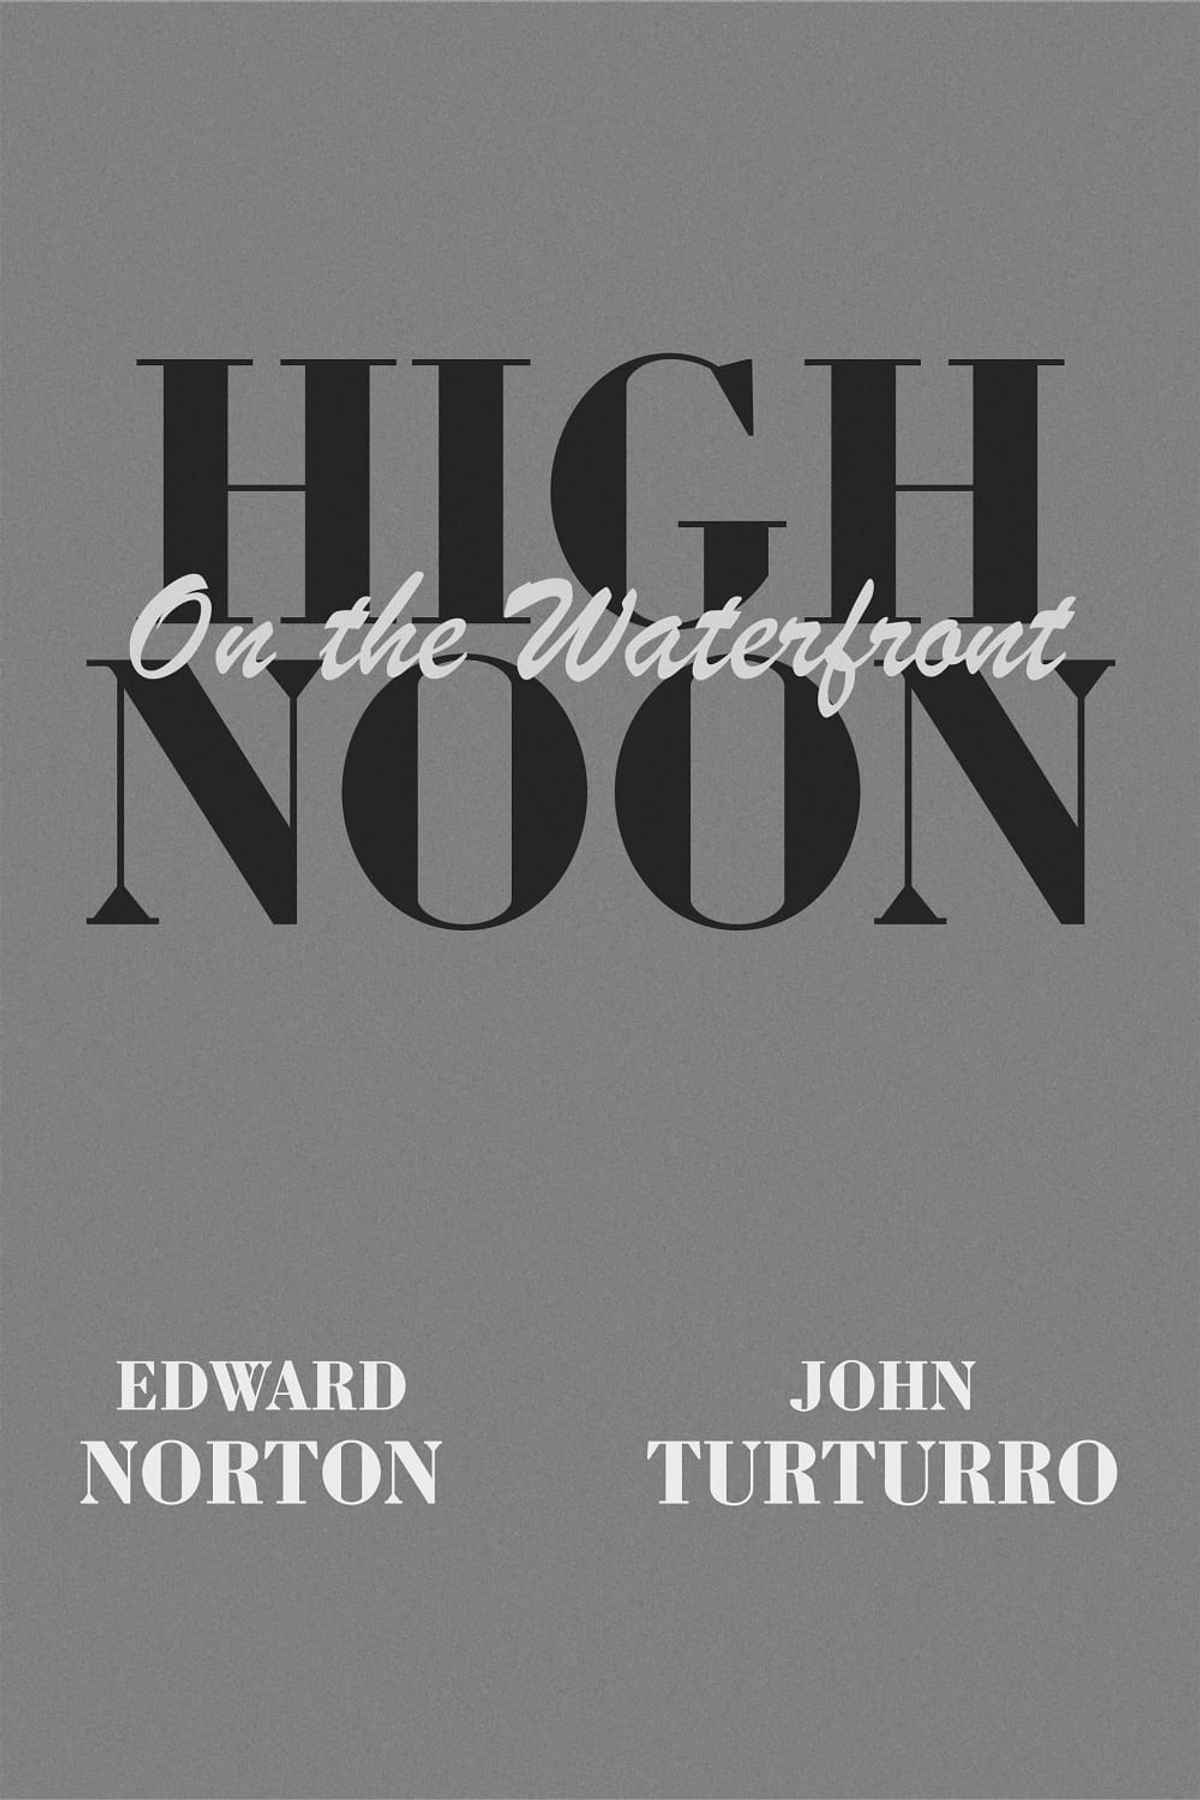 high-noon-on-the-waterfront-movie-2022-release-date-cast-trailer-songs-running-at